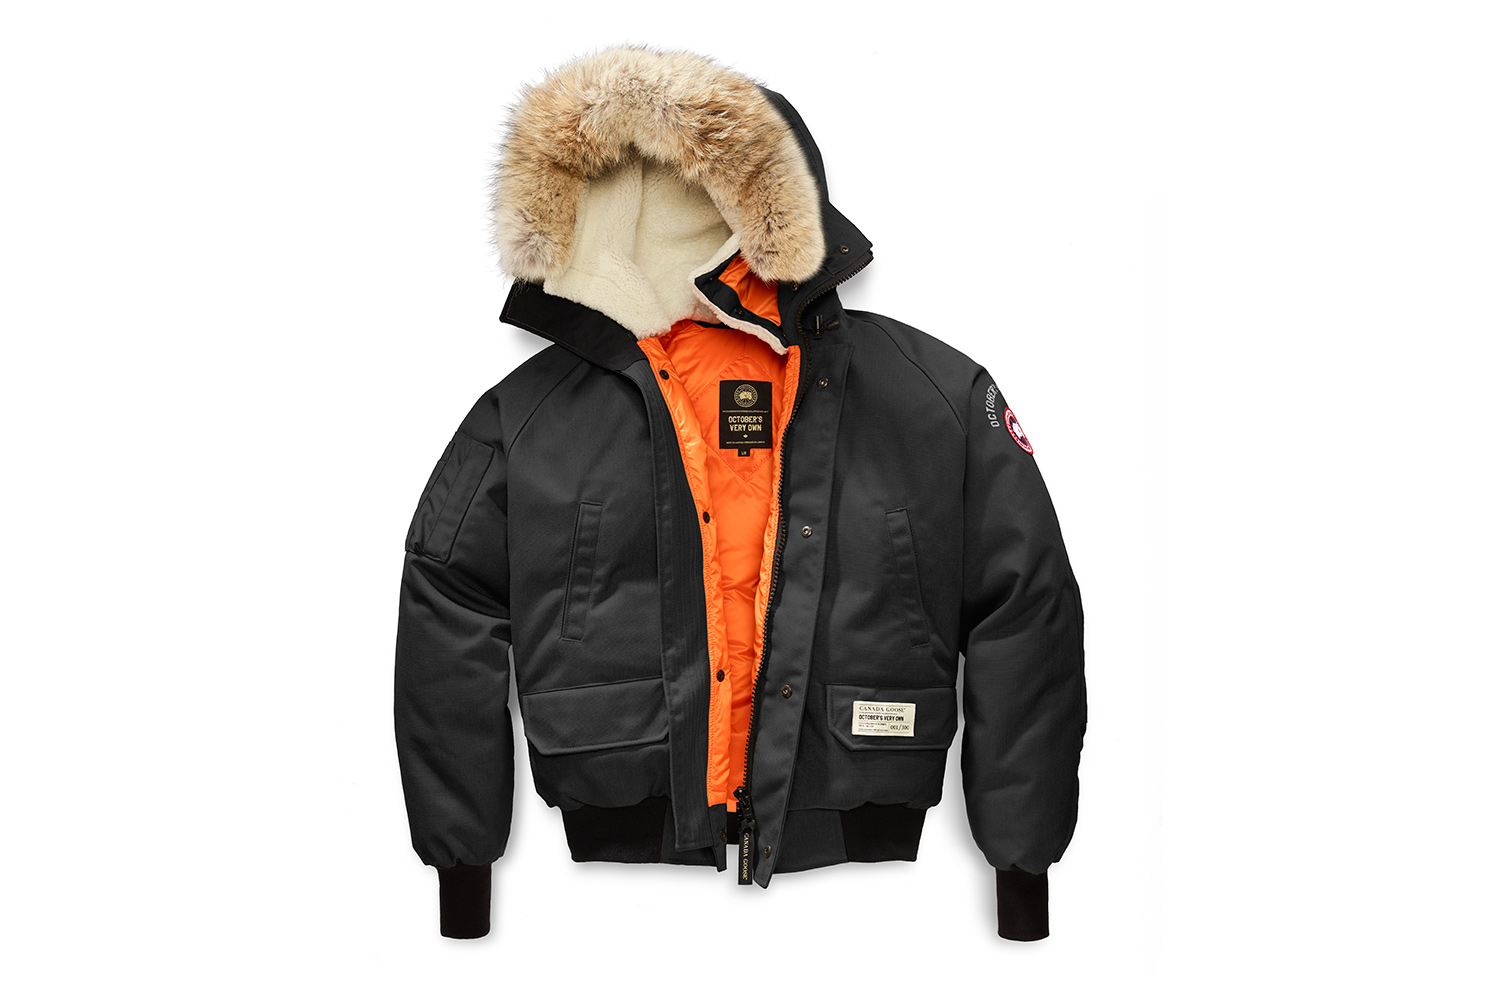 OVO Collaborate With Canada Goose On Outerwear and Headwear